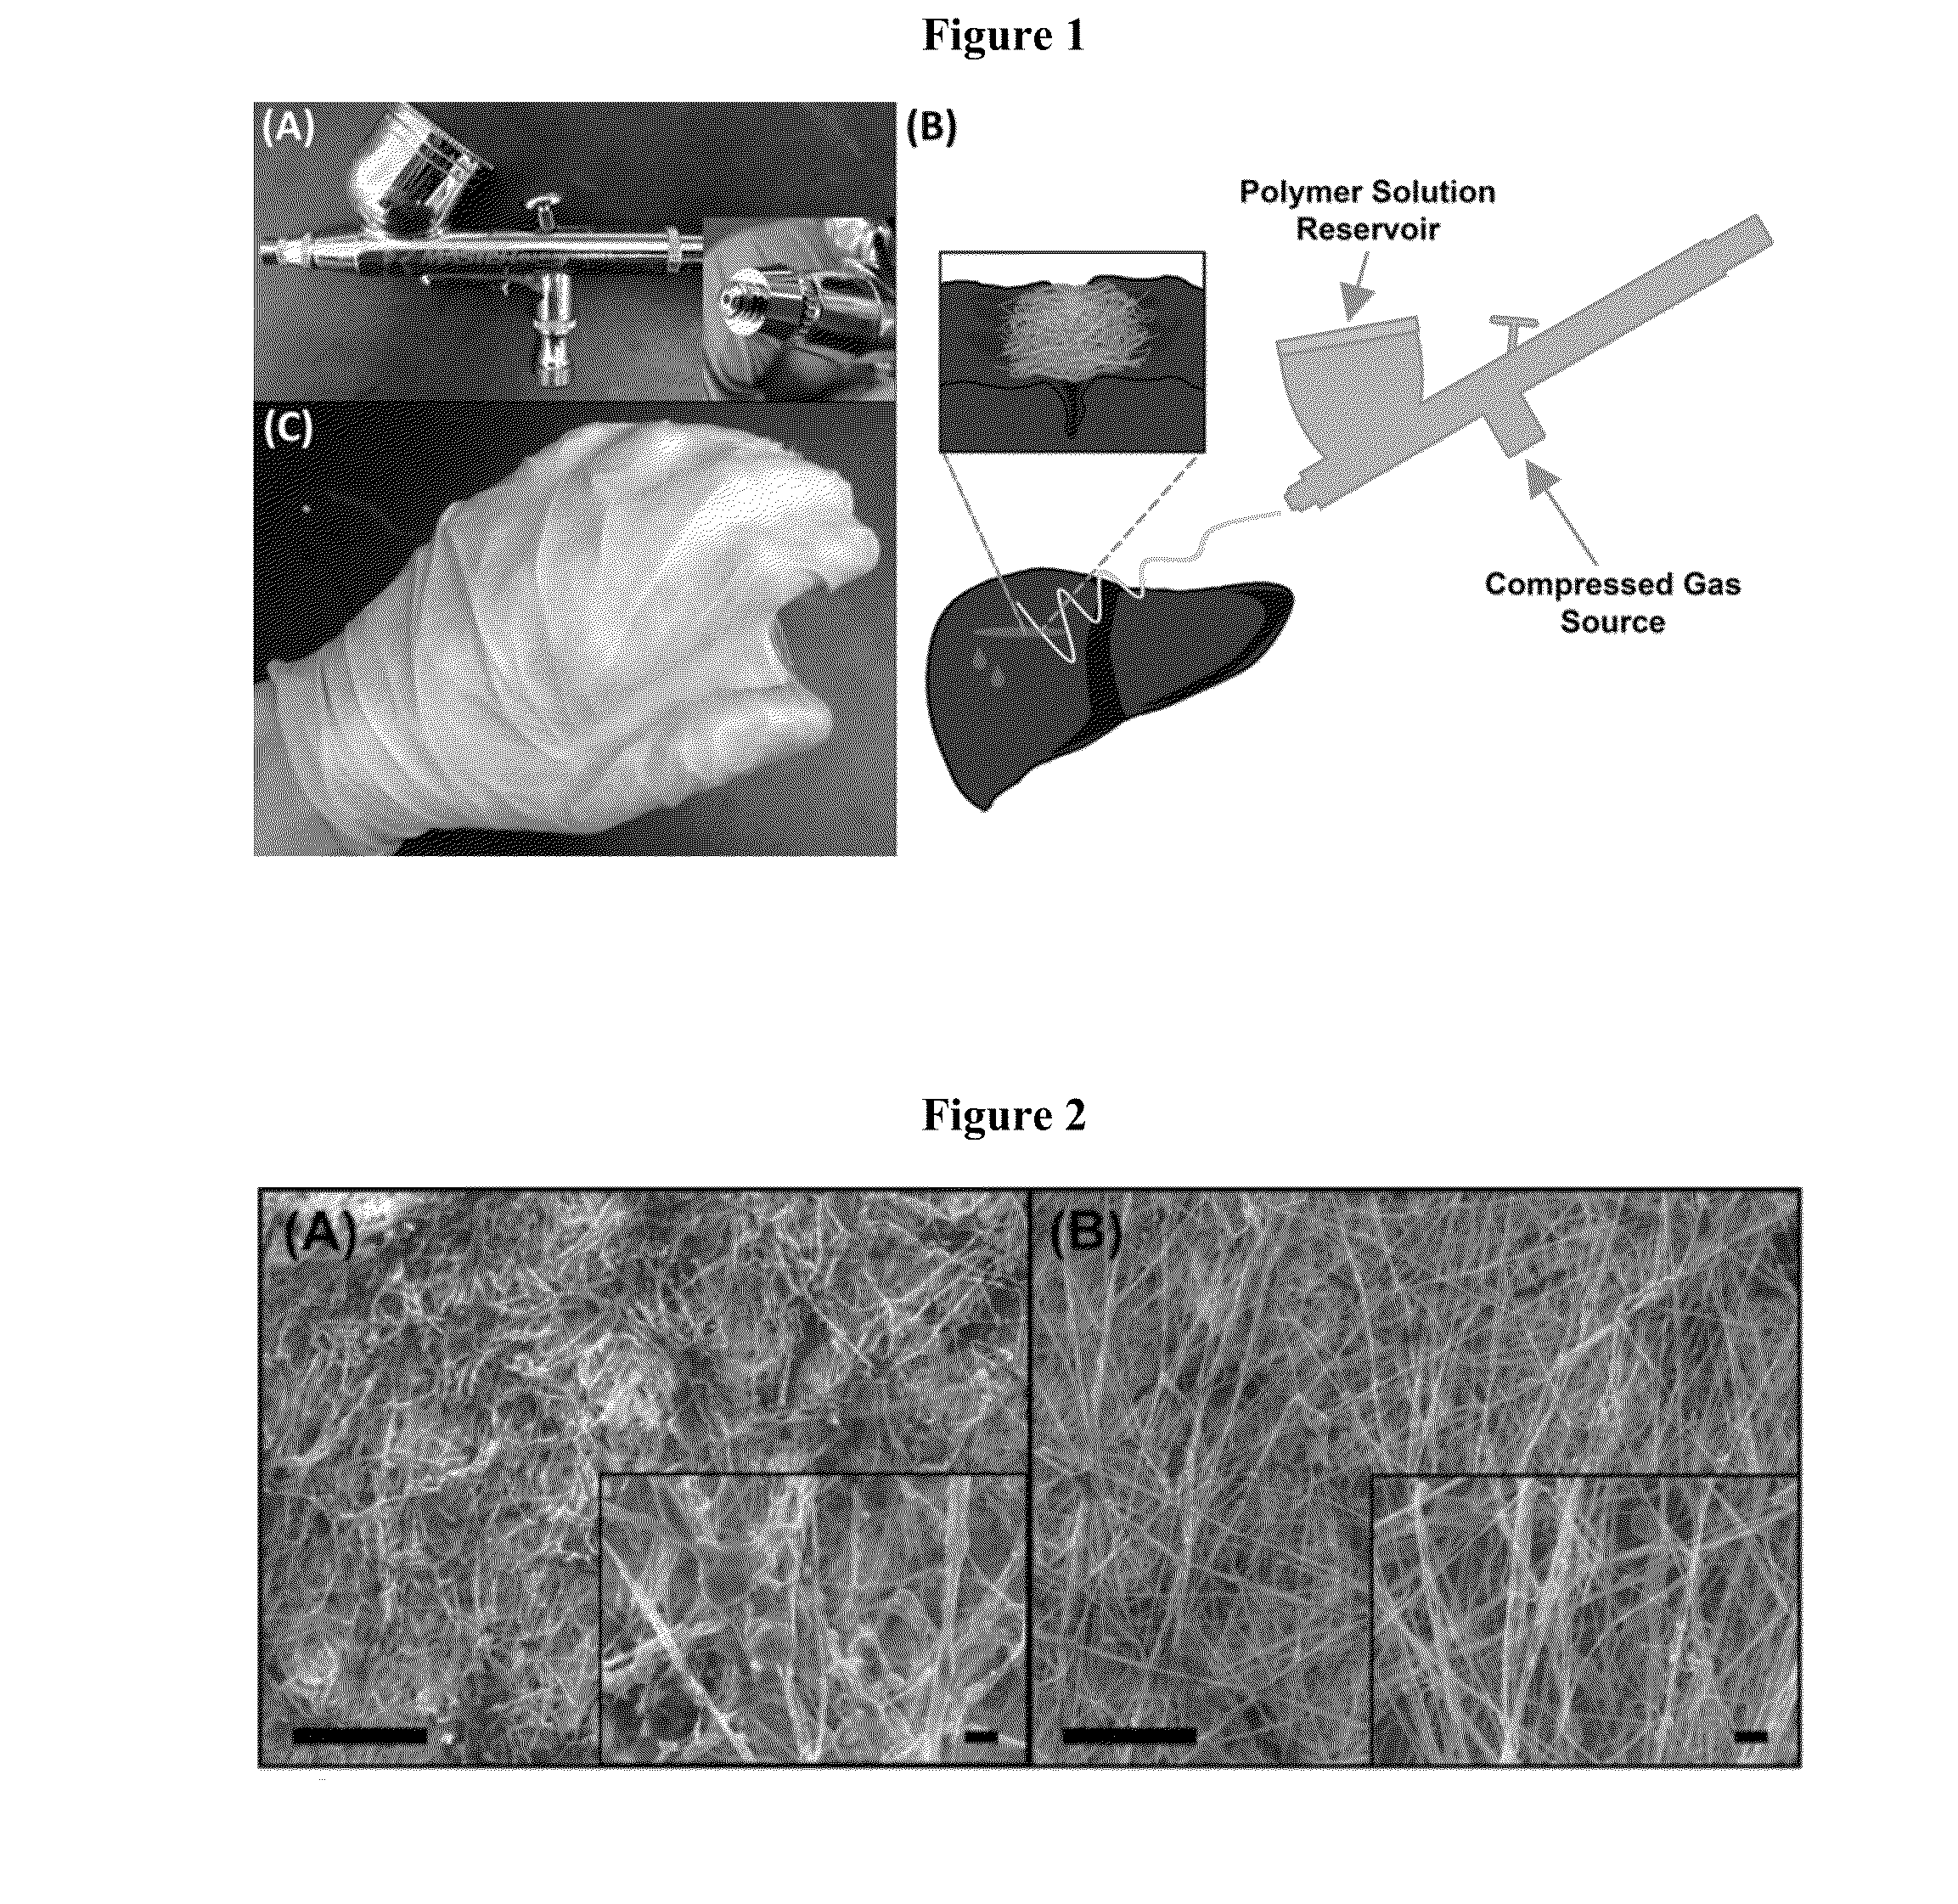 Solution Blow Spun Polymer Fibers, Polymer Blends Therefor and Methods of Use Thereof